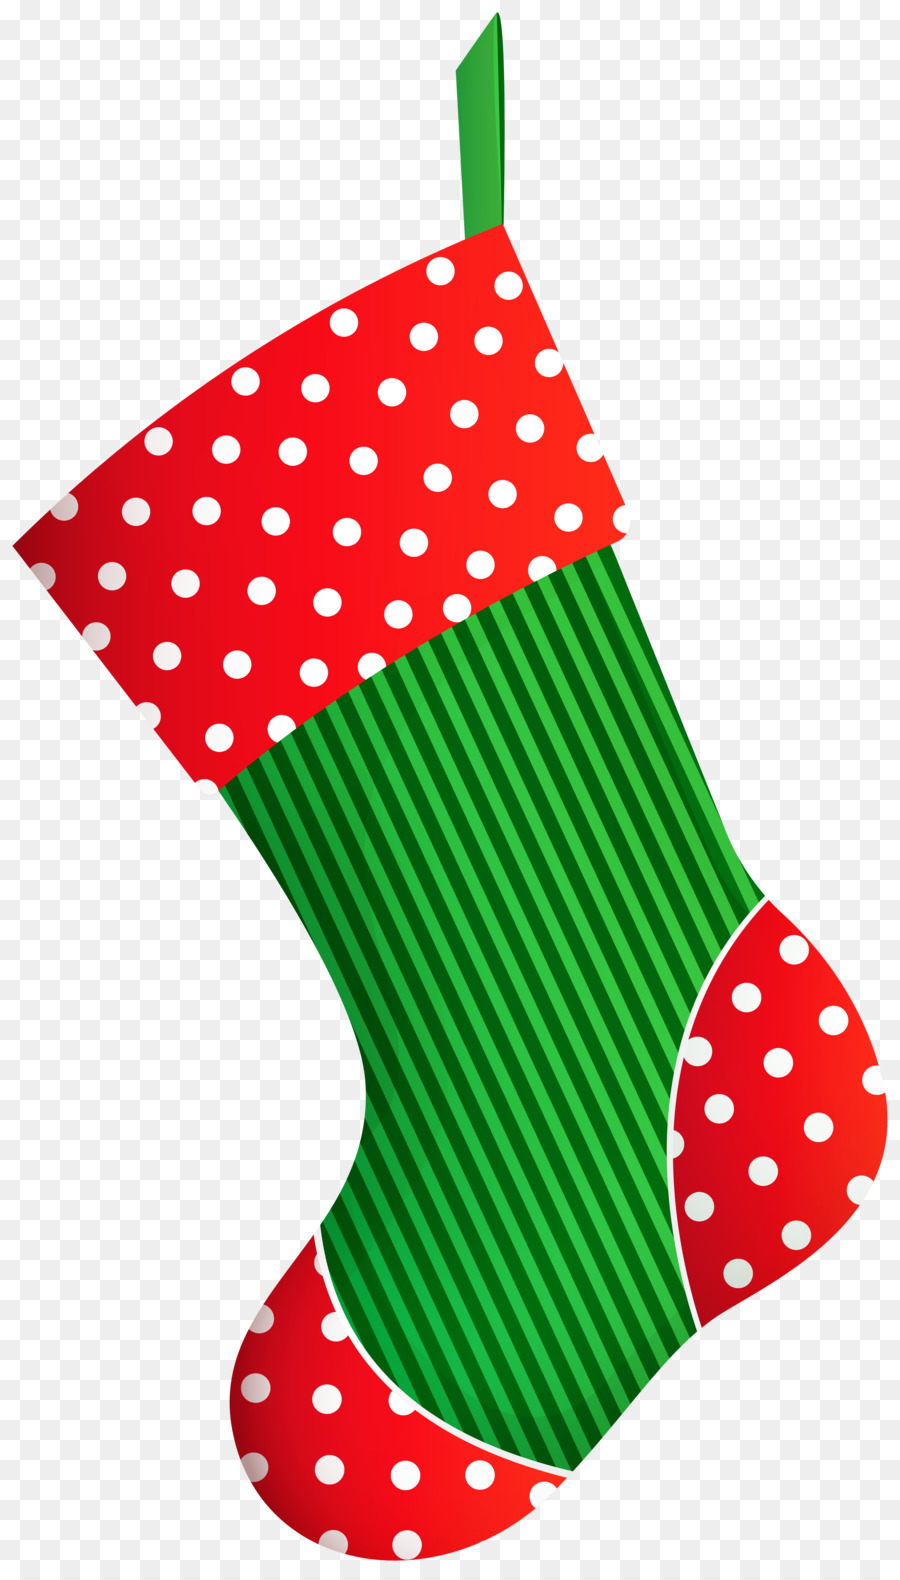 Clip Art Christmas Christmas Stockings Portable Network Graphics Image - stocking transparent background png download - 4576*8000 - Free Transparent Christmas Stockings png Download.